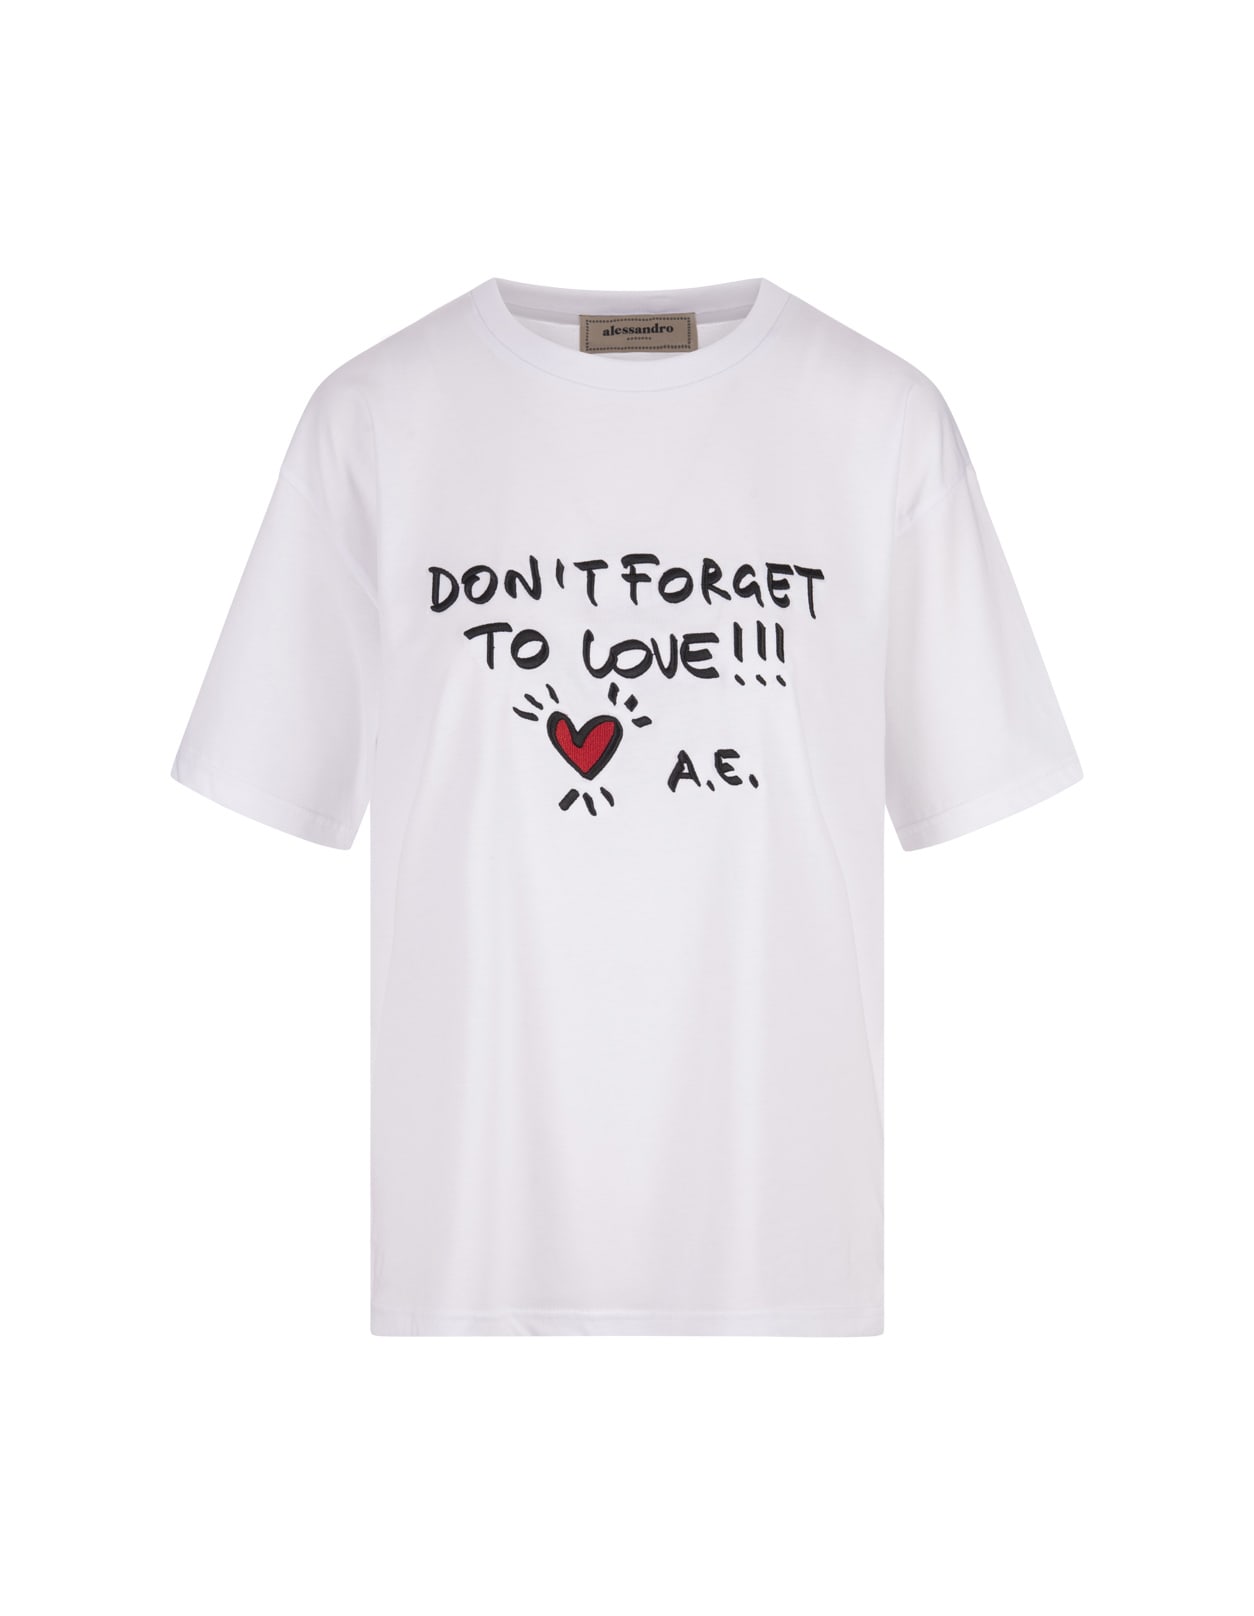 White T-shirt With dont Forget To Love!!! Print